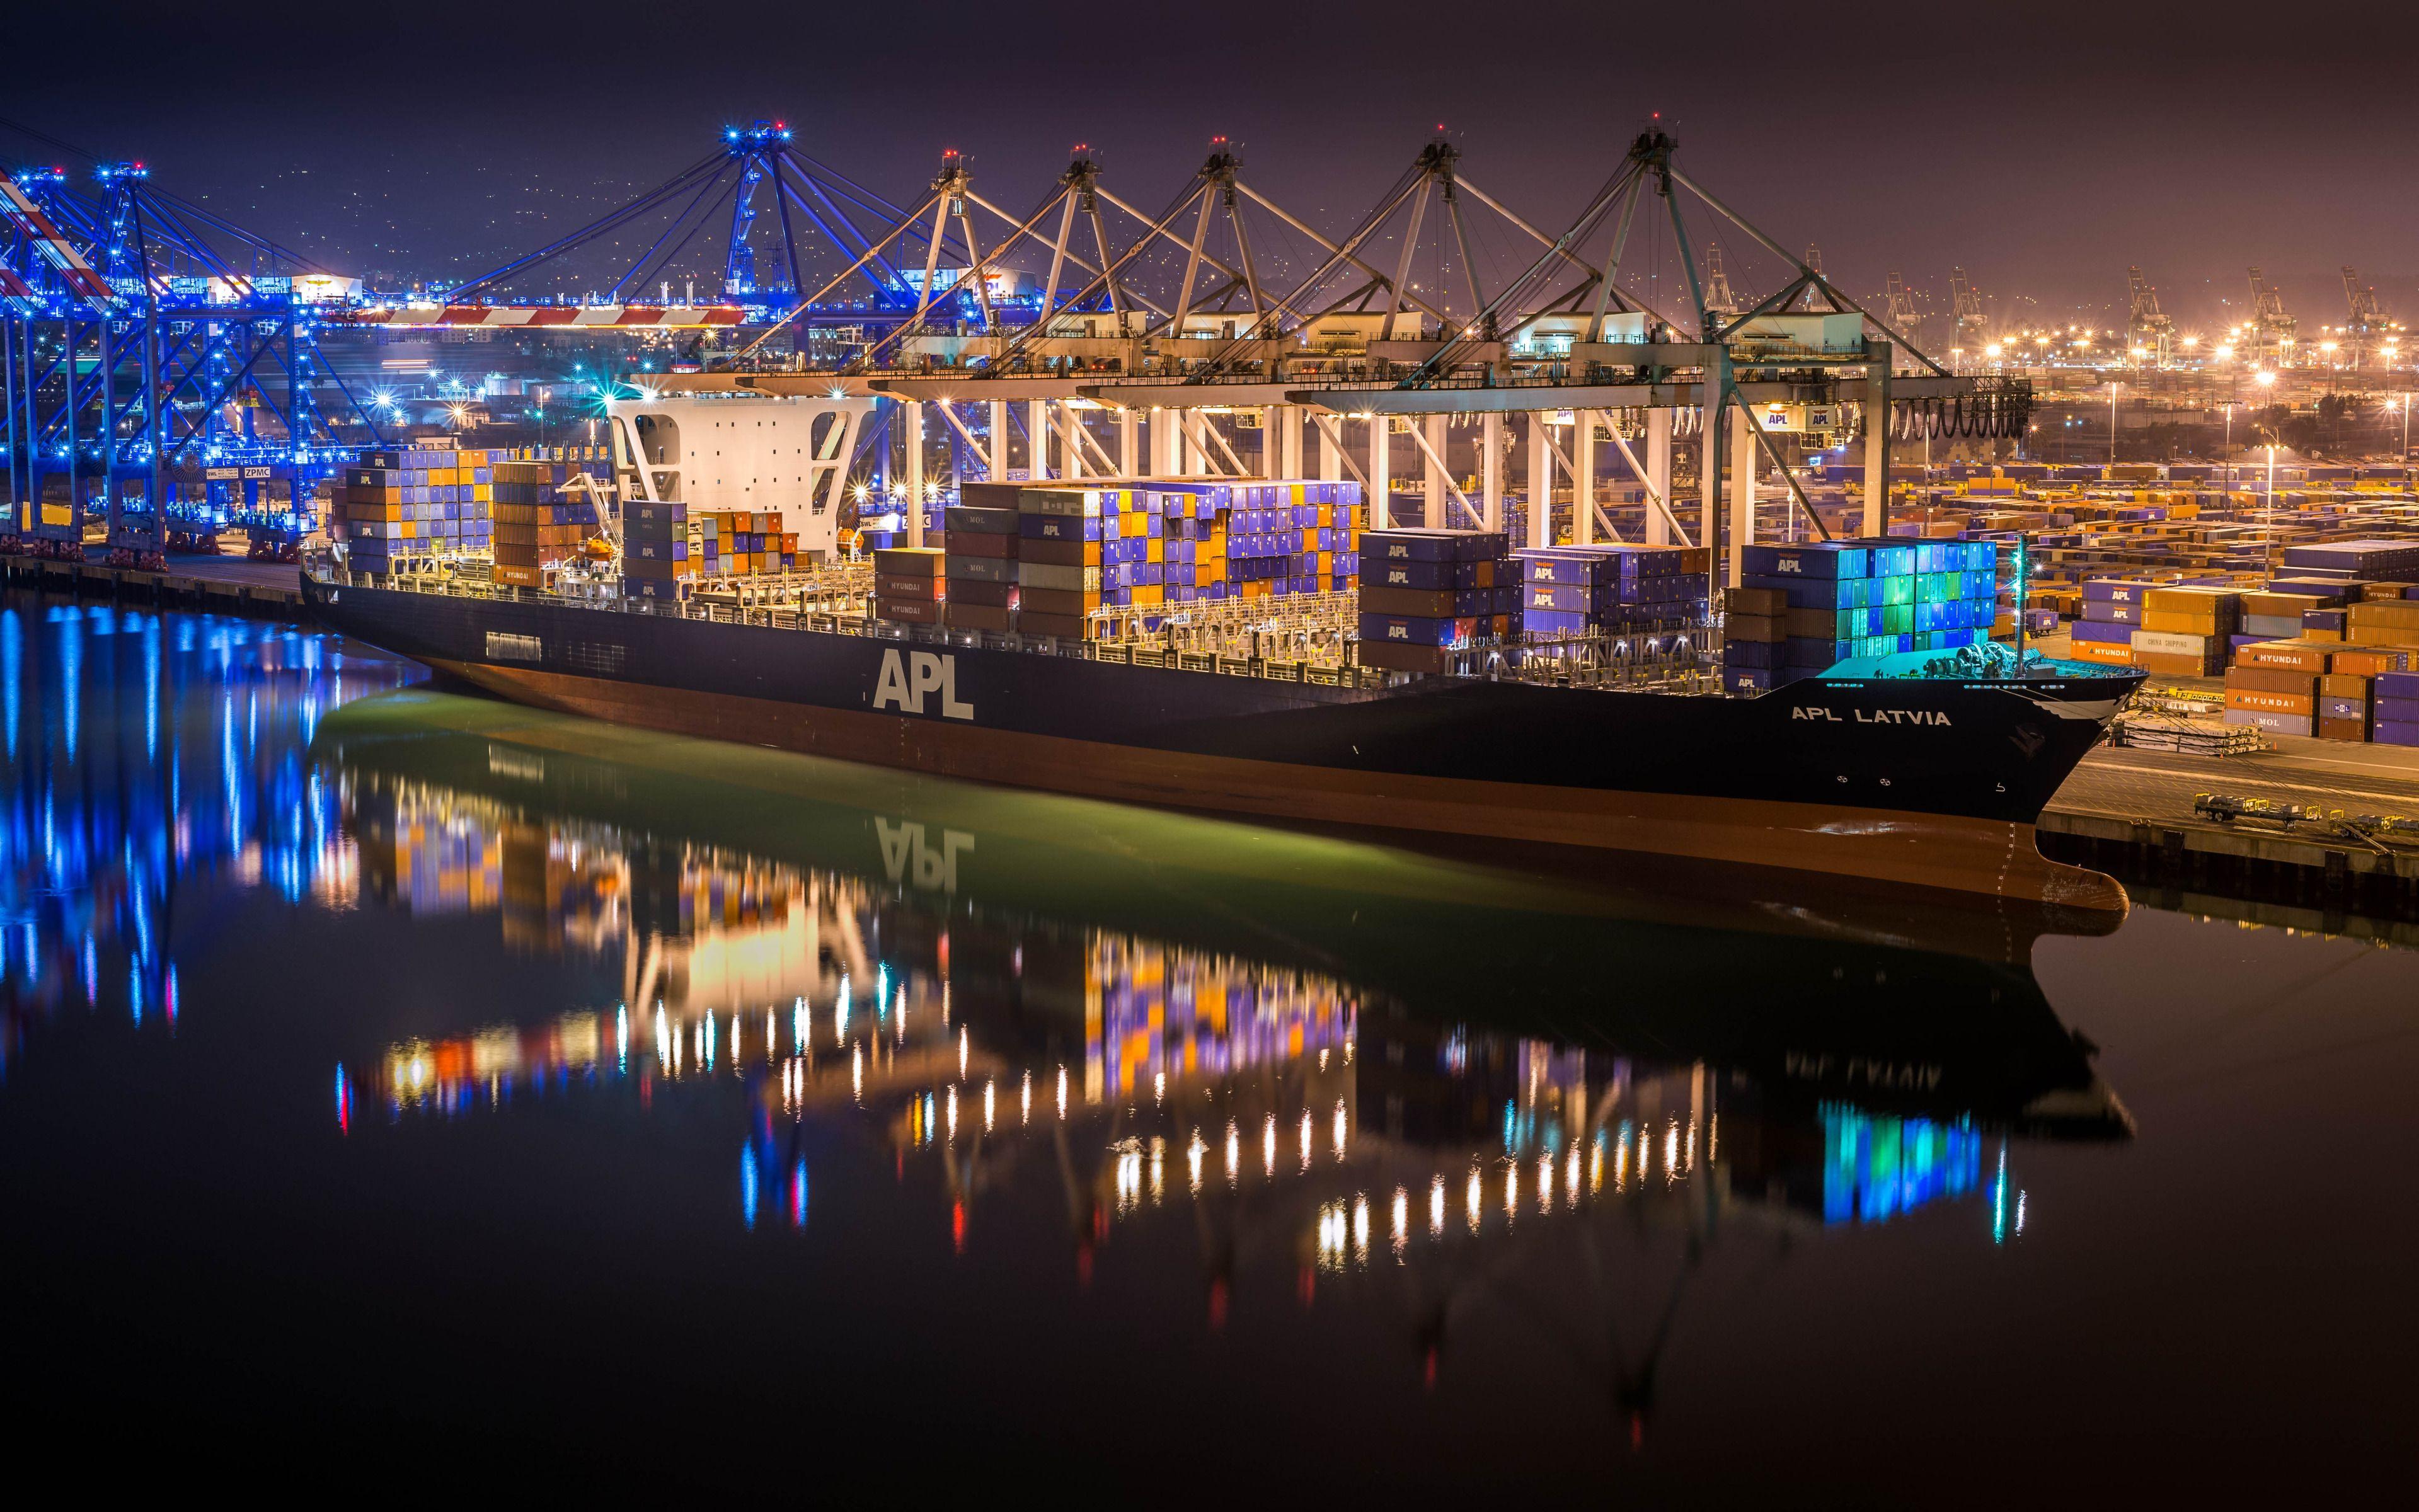 APL Latvia Container Ship in the Harbor widescreen wallpaper. Wide